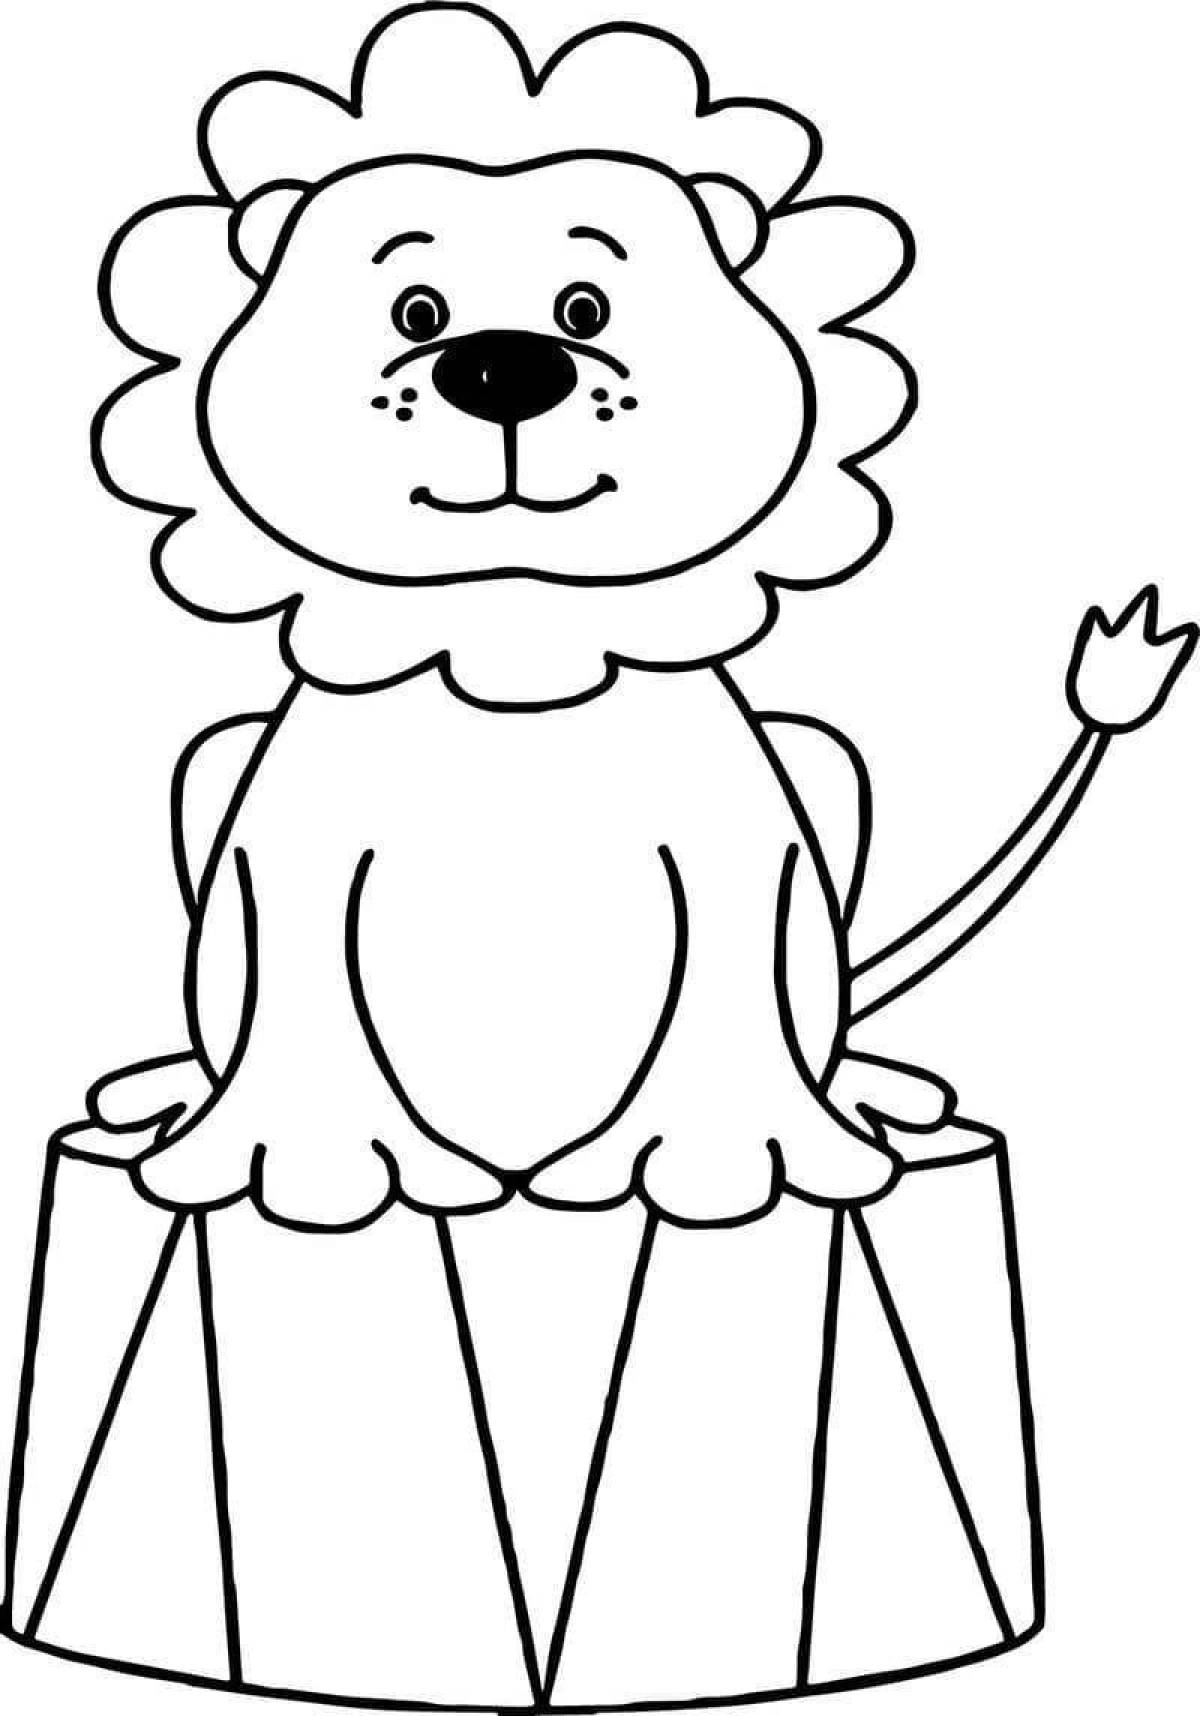 Great circus coloring book for kids